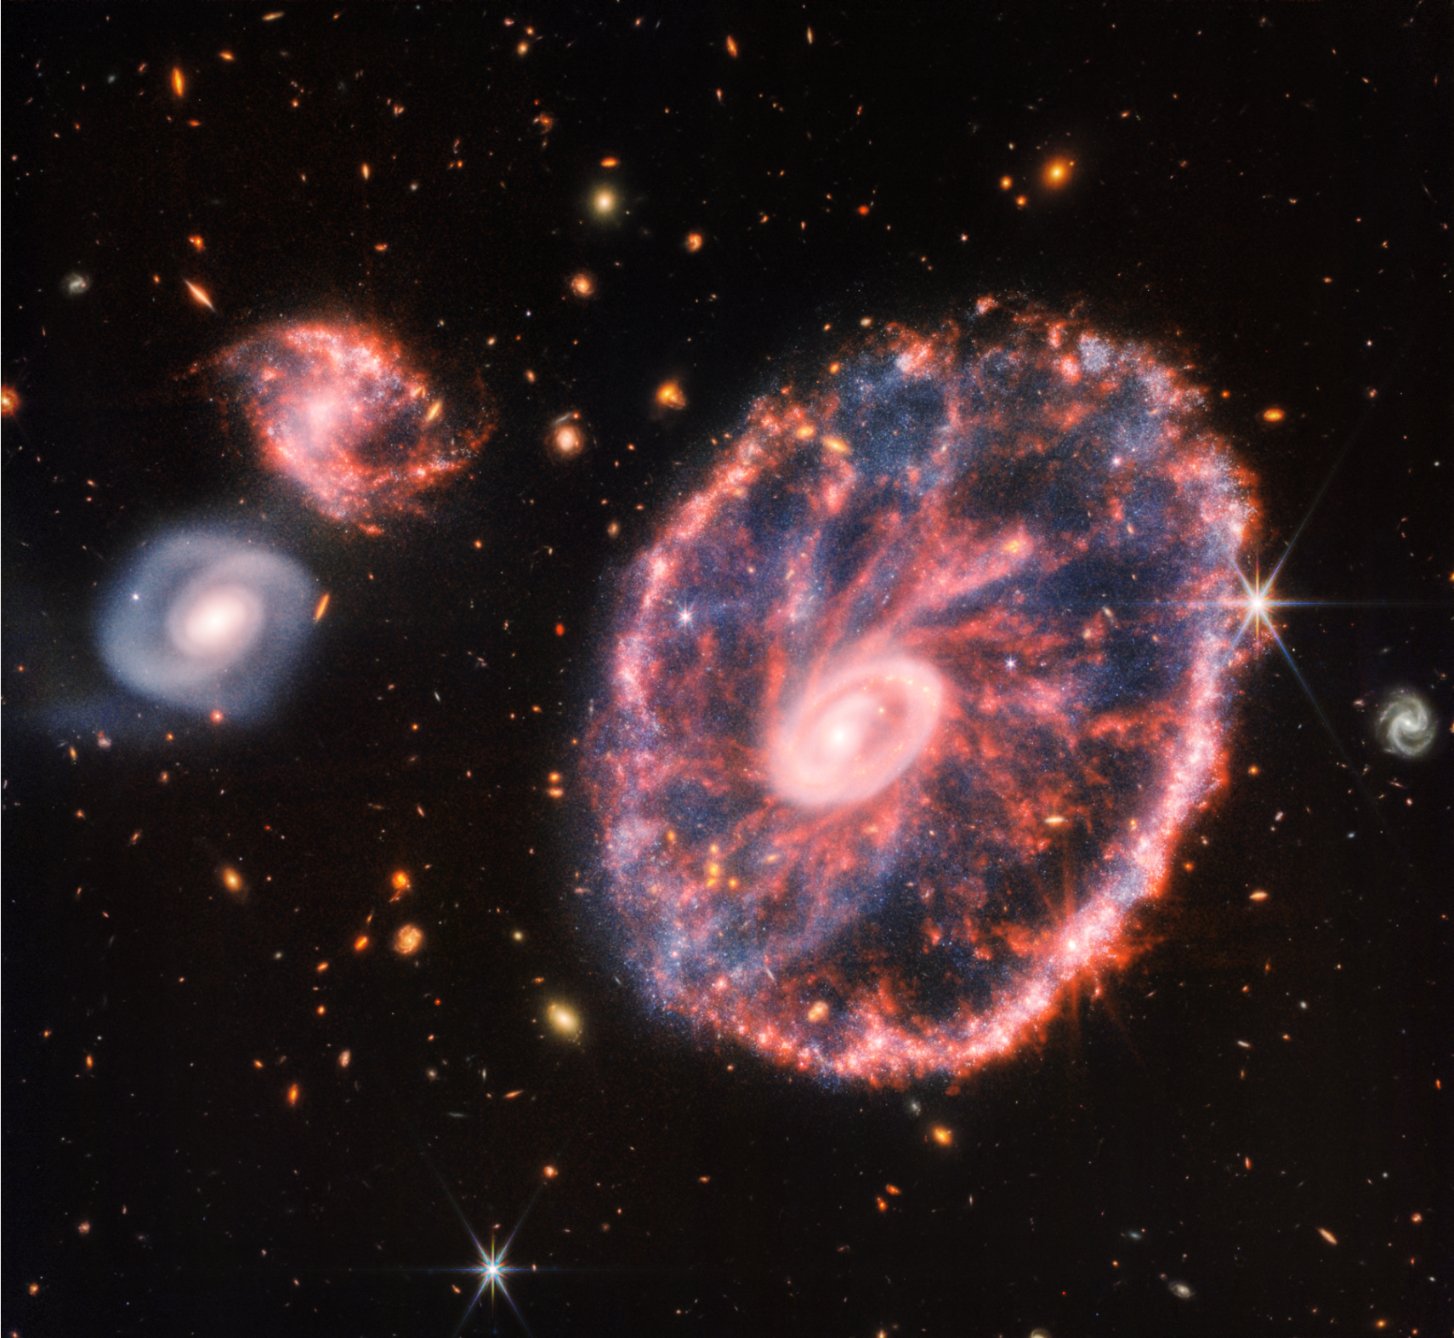 A large galaxy on the right, with two much smaller companion galaxies to the left at 10 o’clock and 9 o’clock. The large galaxy resembles a speckled wheel, with an oval outer ring and a small, off-center inner ring. The outer ring contains pink plumes like wheel spokes, with dusty blue regions in between. The pink areas are silicate dust, while the blue areas are pockets of young stars and hydrocarbon dust. The inner ring is smoother, filled in with a more uniform pale pink. This smaller ring is interwoven with thin, orange-pink threads. On the galaxy's right edge, a bright white star with 8 diffraction spikes shines. The two companion galaxies to the left, one above the other, are about the same size and both spiral galaxies. The galaxy above is a reverse S shape but similar in coloring and texture as the large ring galaxy. The galaxy below is smoother and largely white, with a blue tinge. The background is black and full of more distant, orange-red colored galaxies of various sizes.